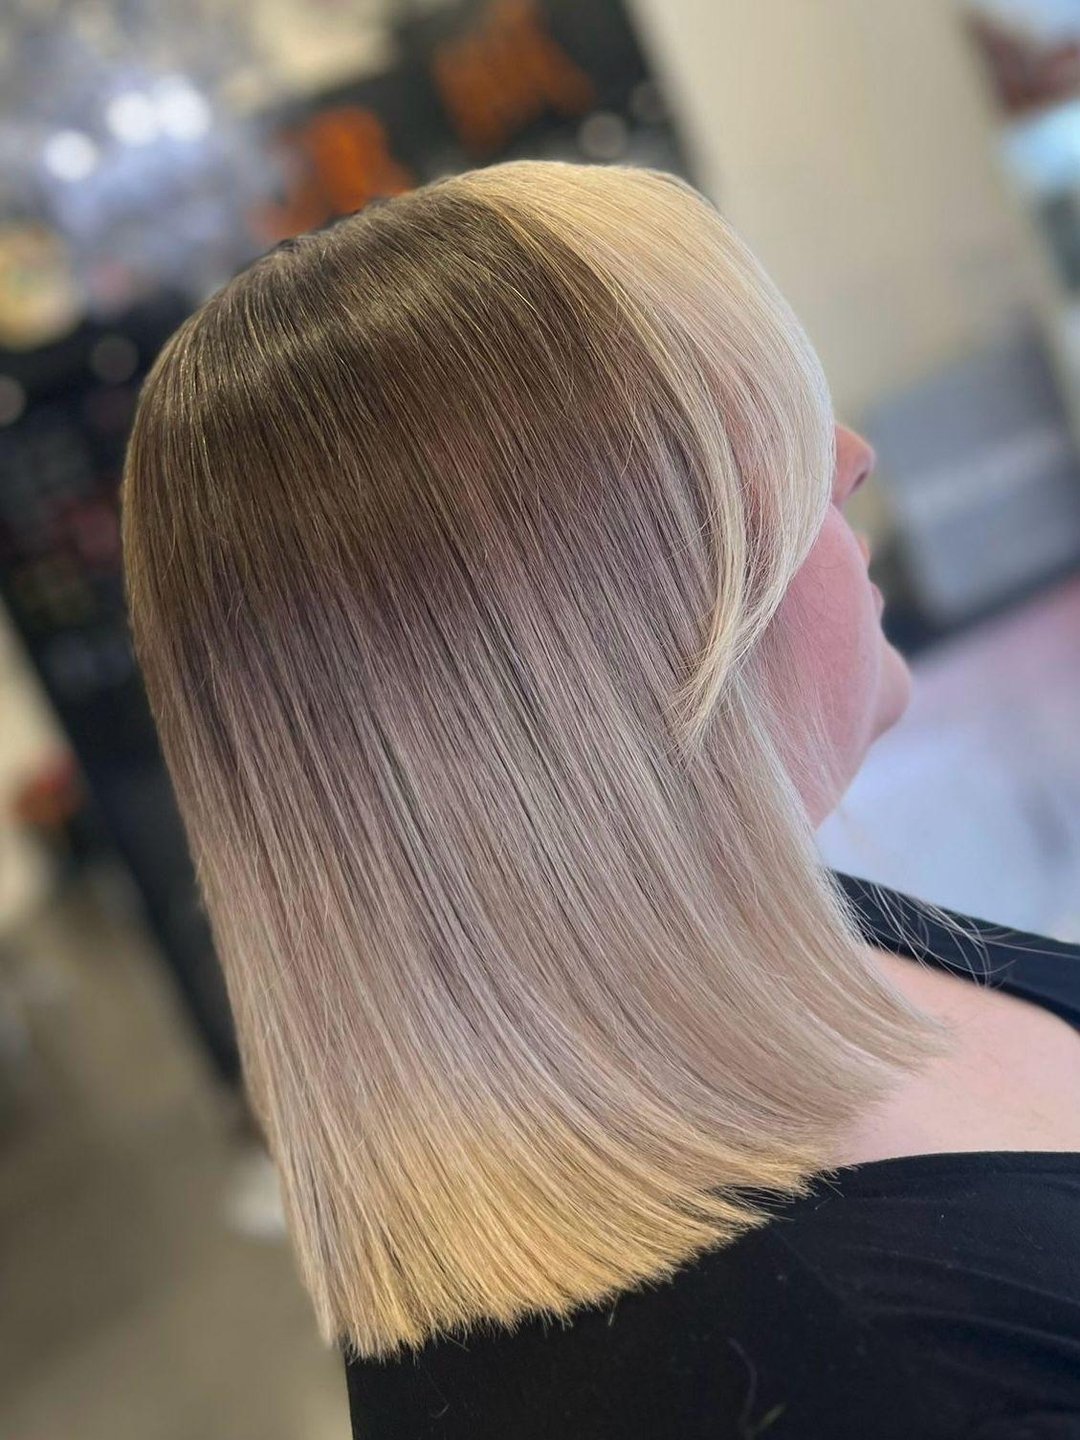 Striking the perfect balance with a sun-kissed touch! ☀️

Our client's shoulder-length hair boasts a delightful light brown blonde balayage, accentuated by a chic money piece fringe. Ready to elevate your style game? Click the link in our bio and let